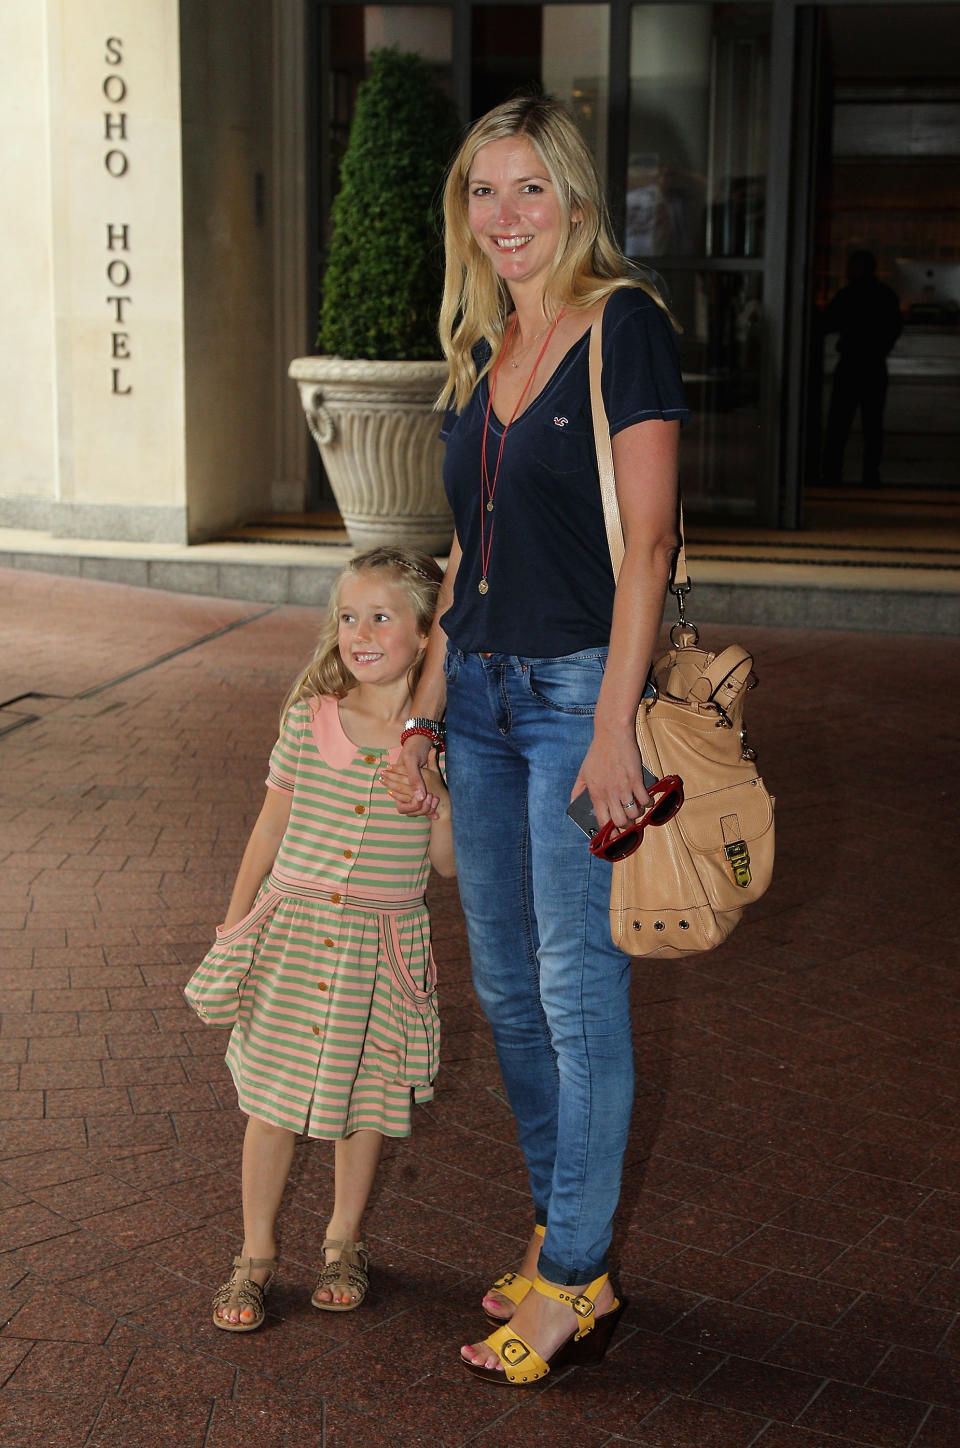 LONDON, ENGLAND - AUGUST 09:  Lisa Faulkner with her daughter Billie attend the Smurfs in 3D UK Gala Premiere and Tea Party at Soho Hotel on August 9, 2011 in London, England.  (Photo by Chris Jackson/Getty Images)